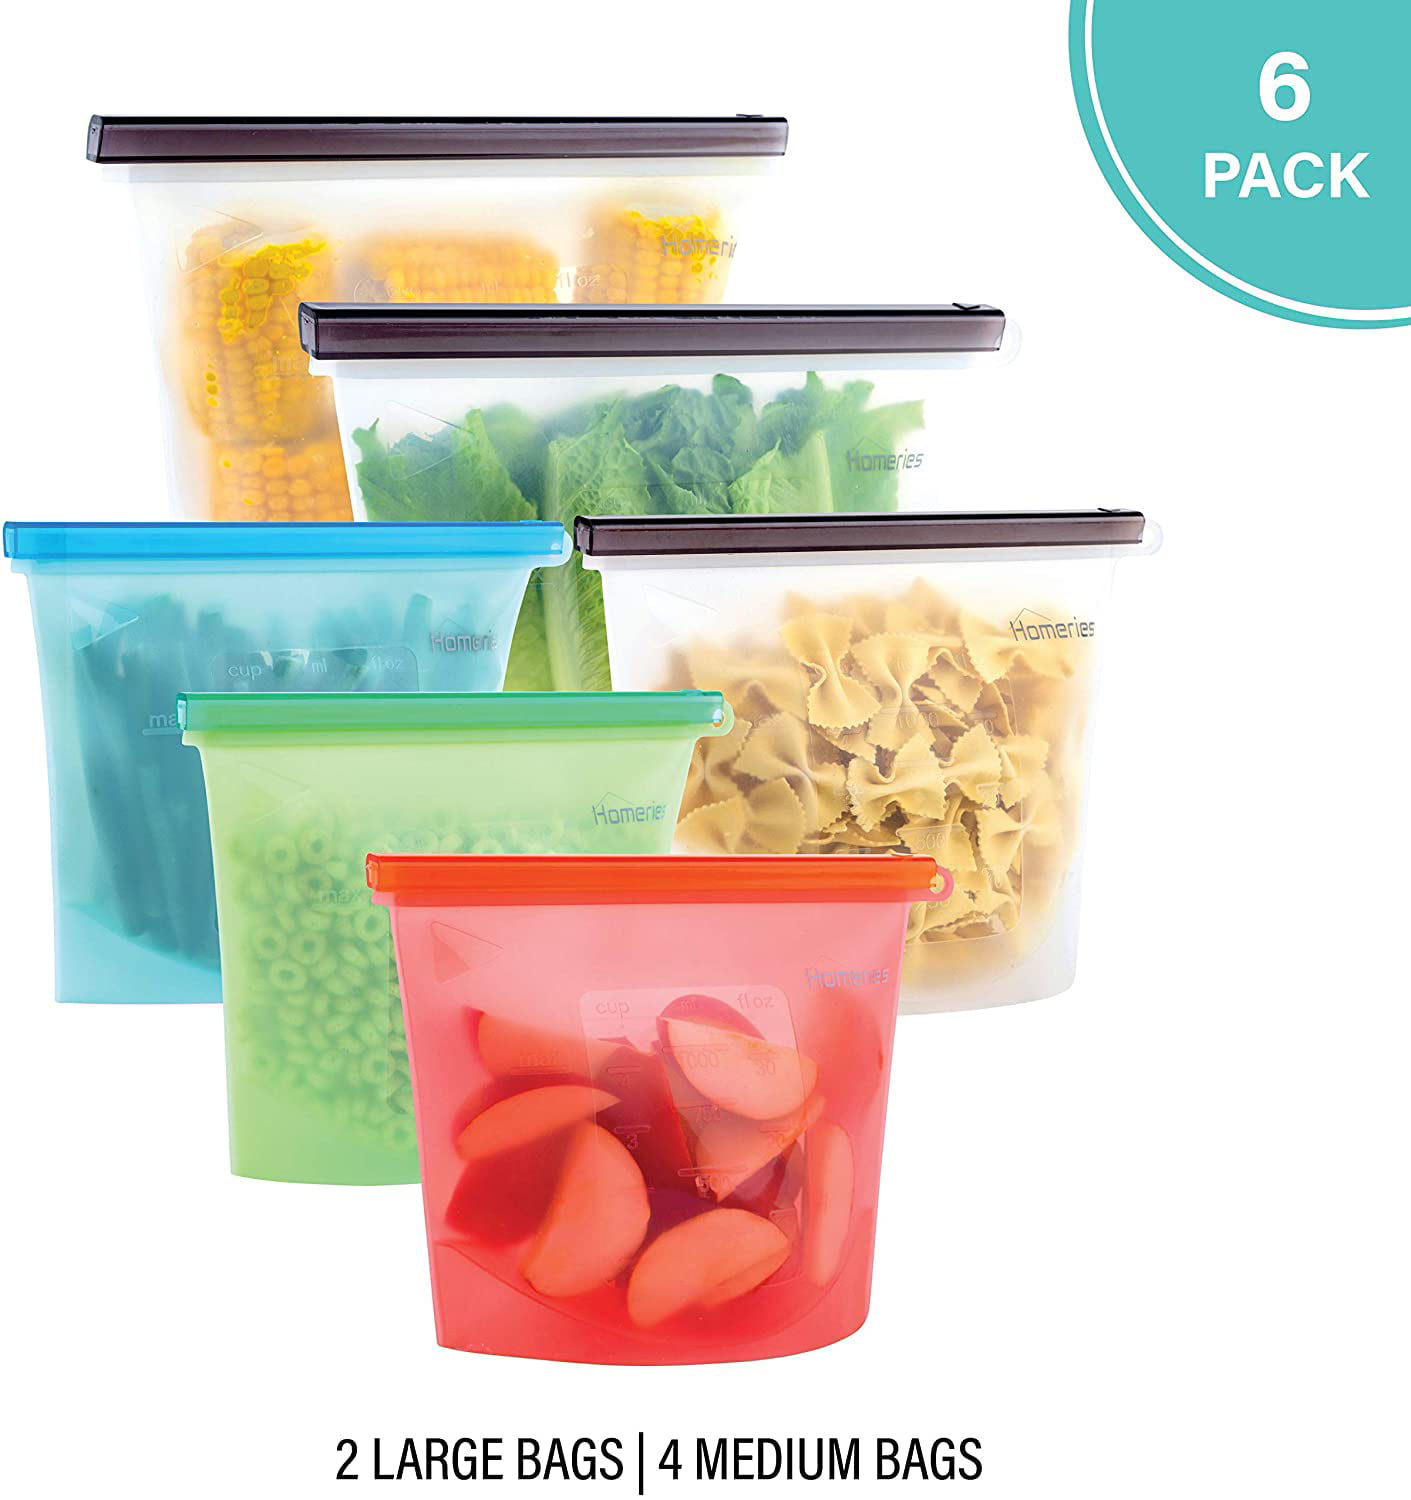 Ludlz Reusable Silicone Food Storage Bags, Sandwich Bags, Airtight Seal  Freezer Bags, Liquid, Snack, Lunch, Fruit, Fresh Produce Bags